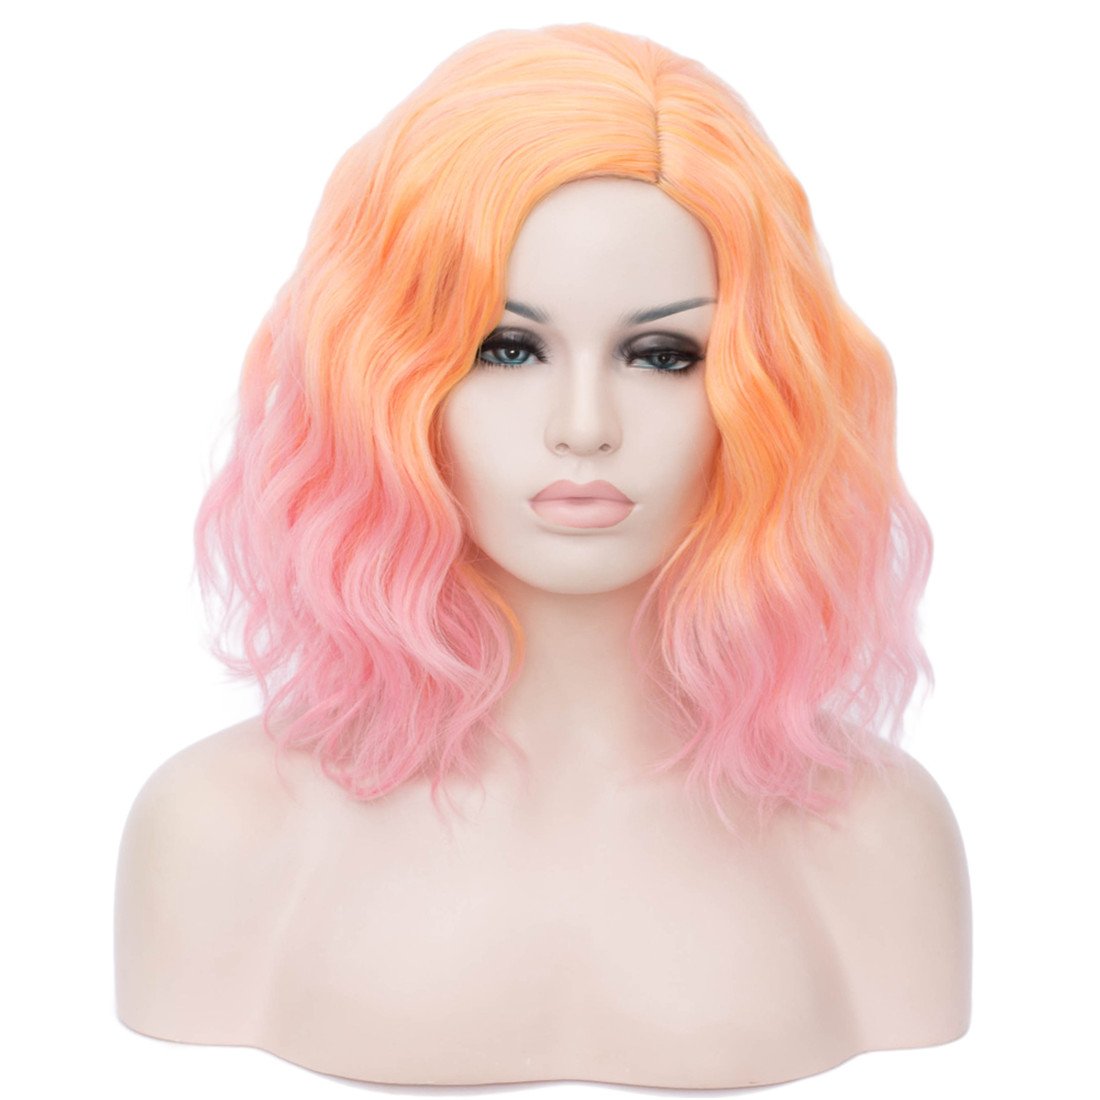 pink wig orange wig HAIR Synthetic Curly Bob Wig with Bangs Short Bob Wavy Hair Wigs Wine Red Color Wigs for Women Bob Style Synthetic Heat Resistant Bob Wigs.